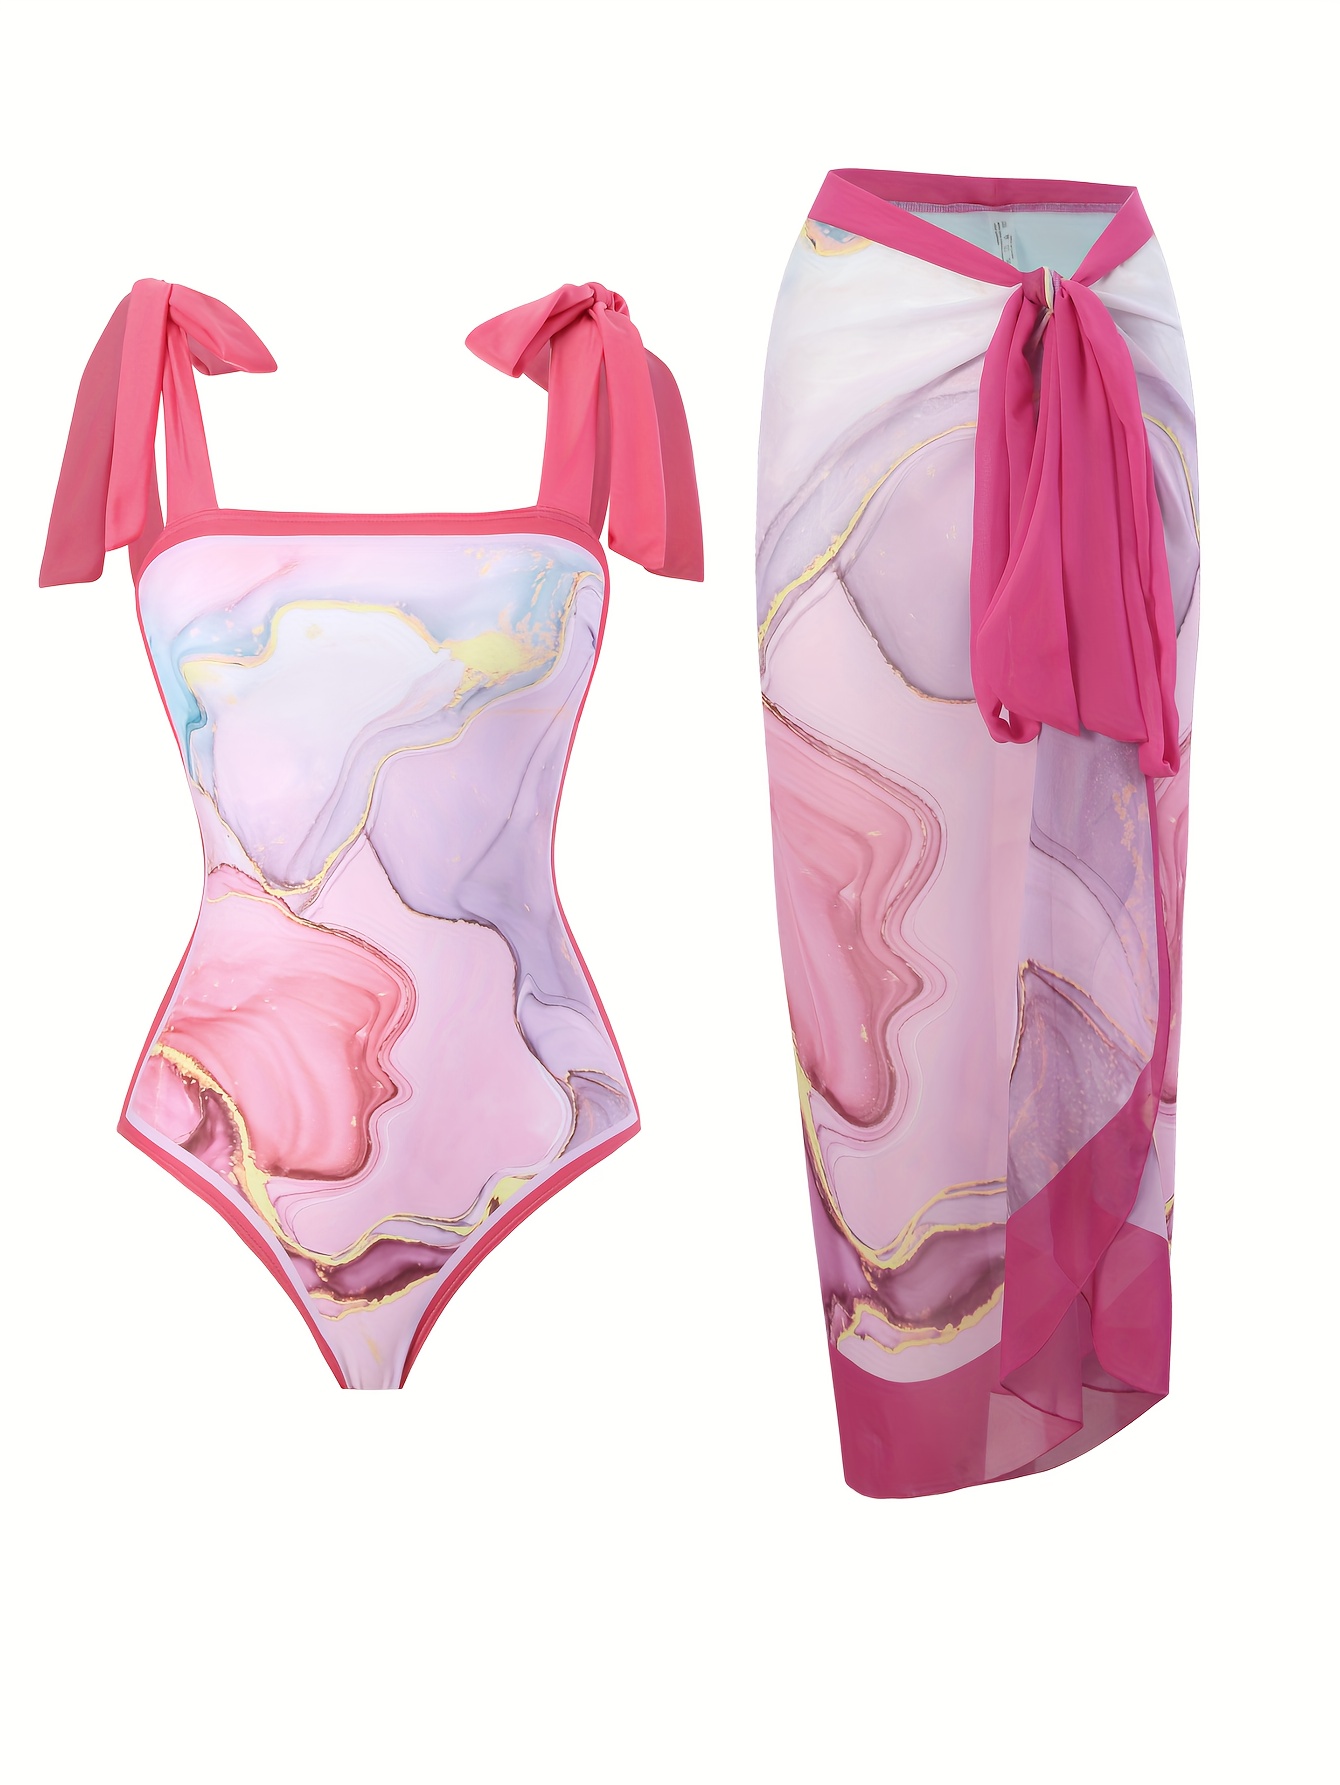 Swimsuit With Overlay Skirt in Pink